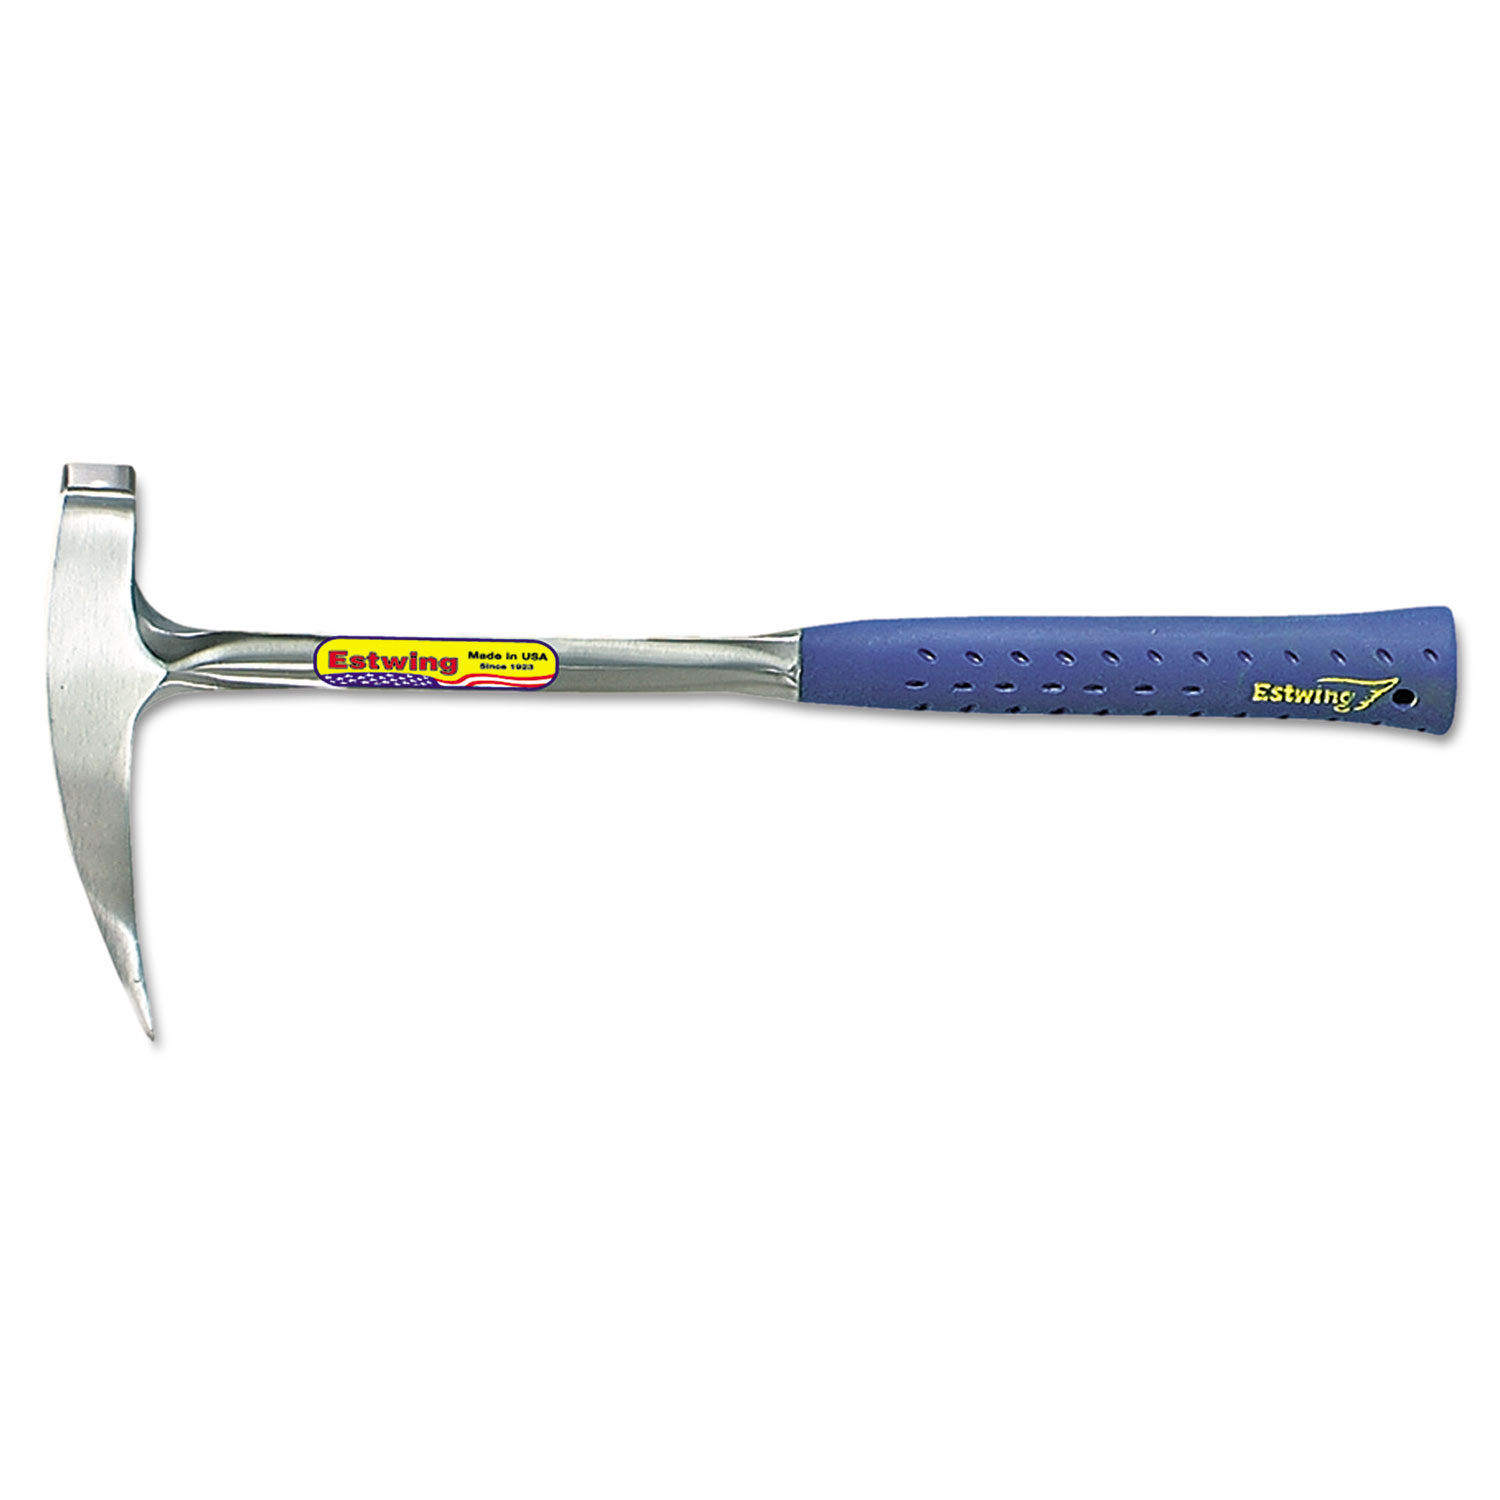 Geological Rock-Pick Hammer, Pointed Tip, 22oz, 16 1/2 Length, Cushion Grip